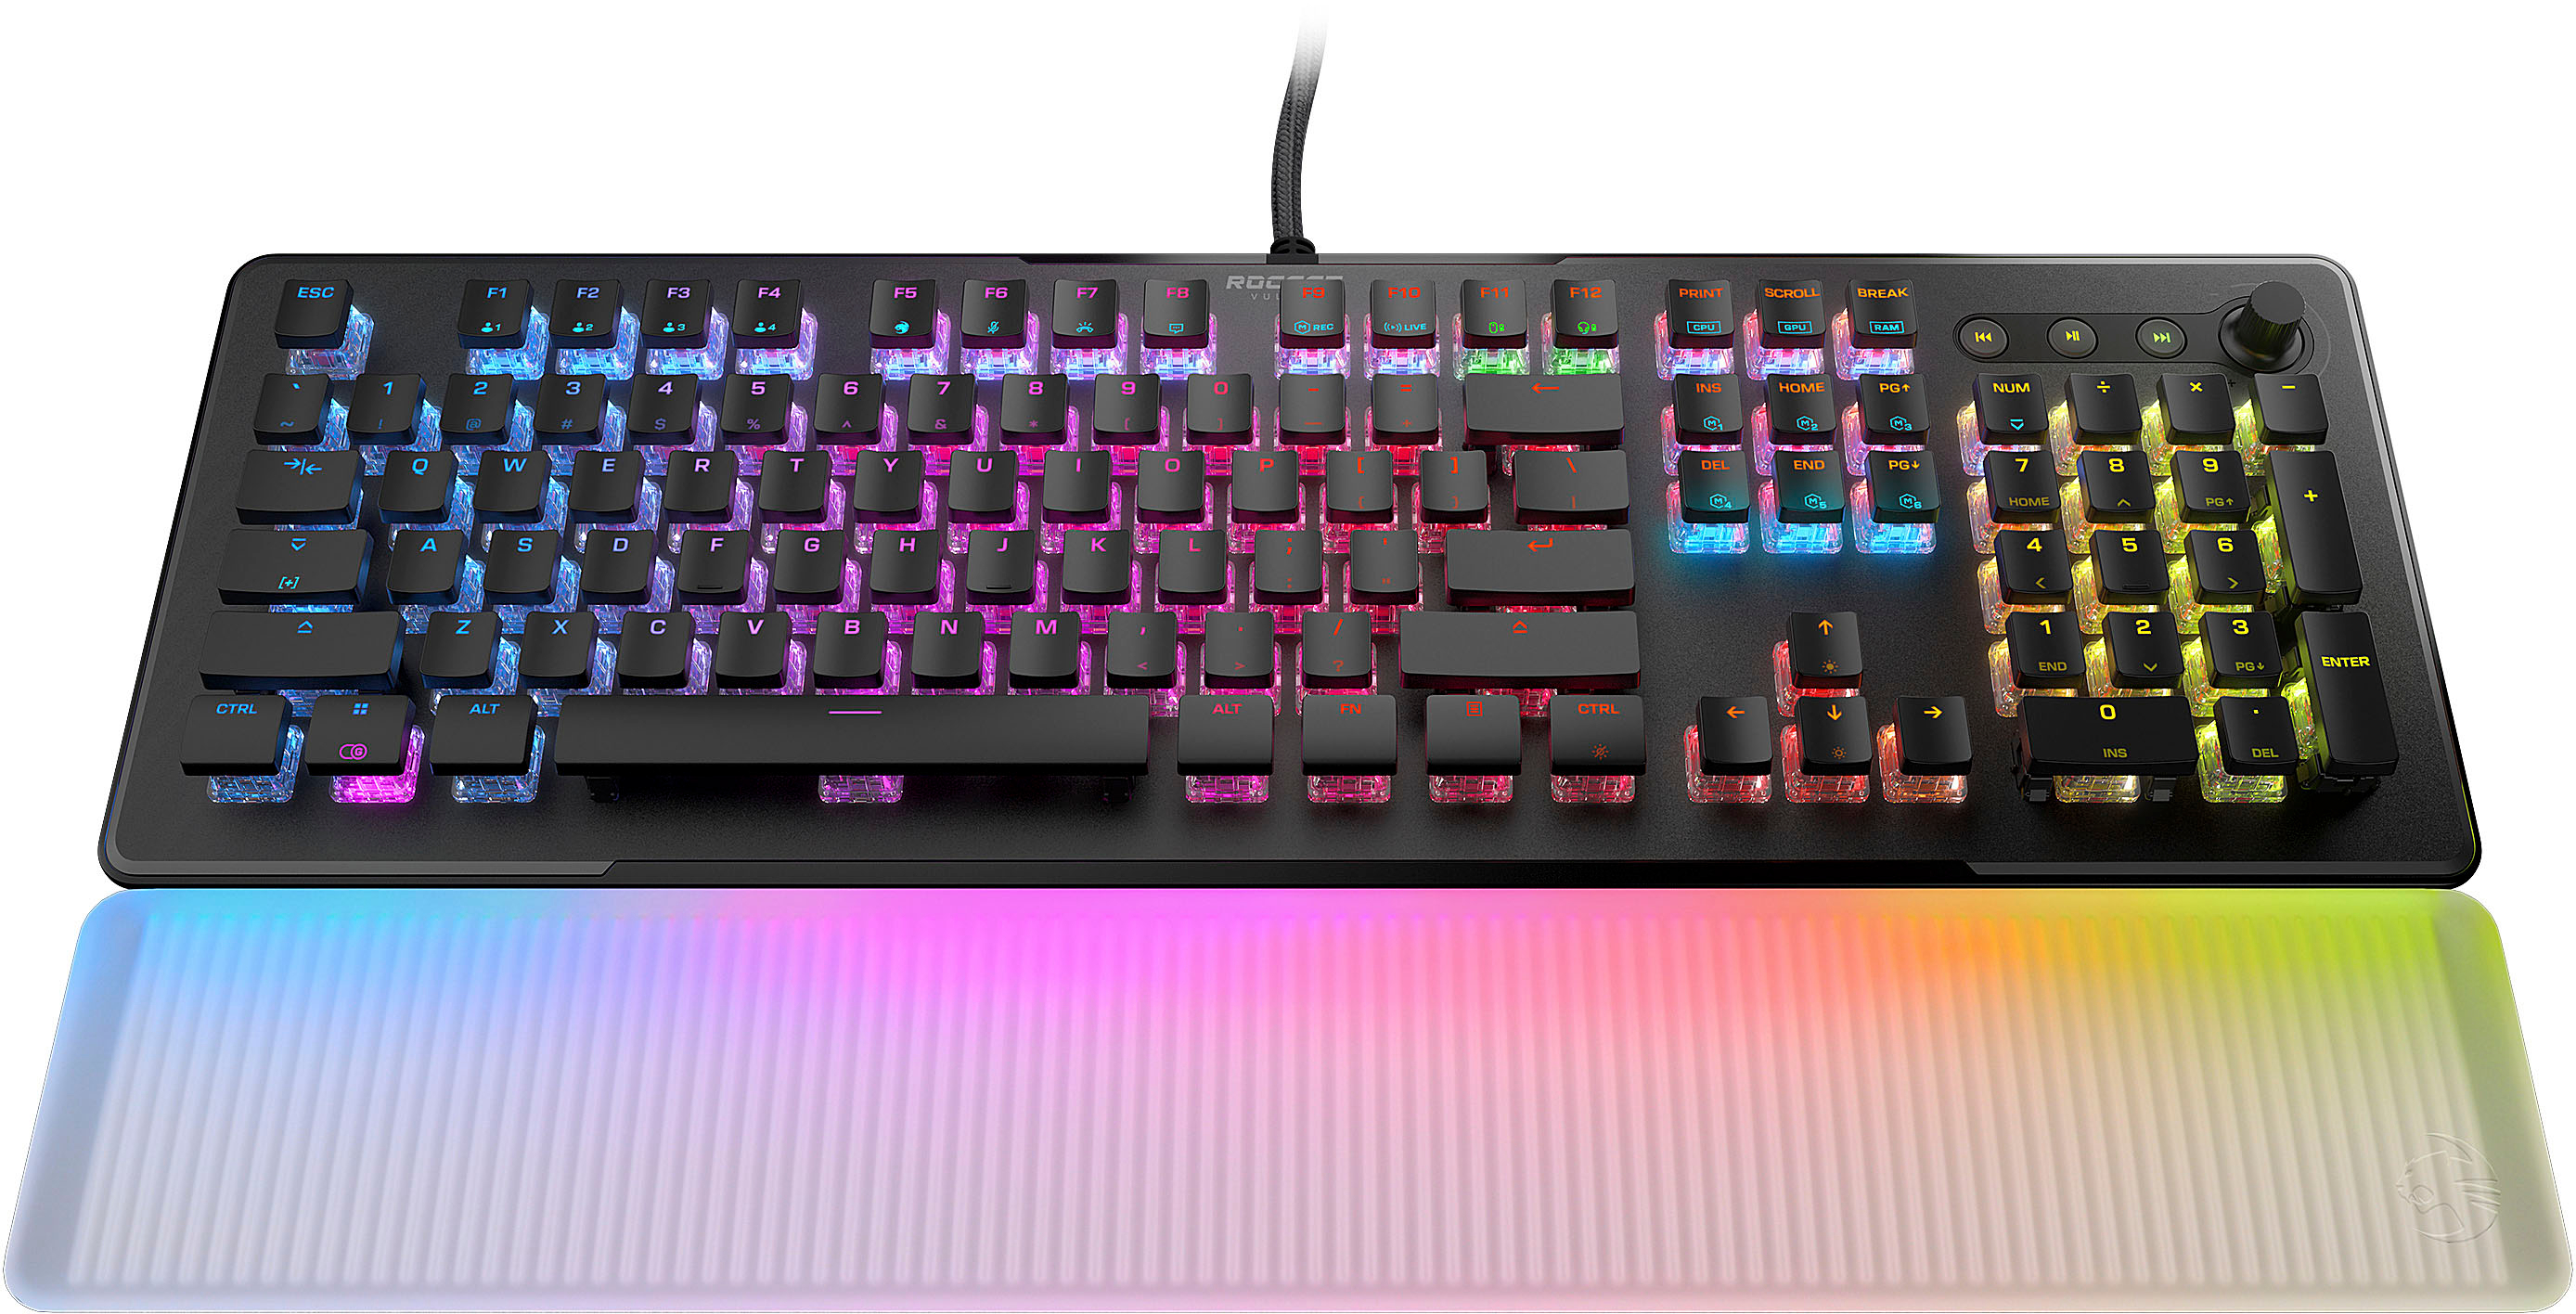 ROCCAT Vulcan 100 AIMO Mechanical PC Gaming Keyboard, RGB Lighting, Silent,  Per Key LED Illumination, Brown Switches, Aluminum Top Plate, Silver